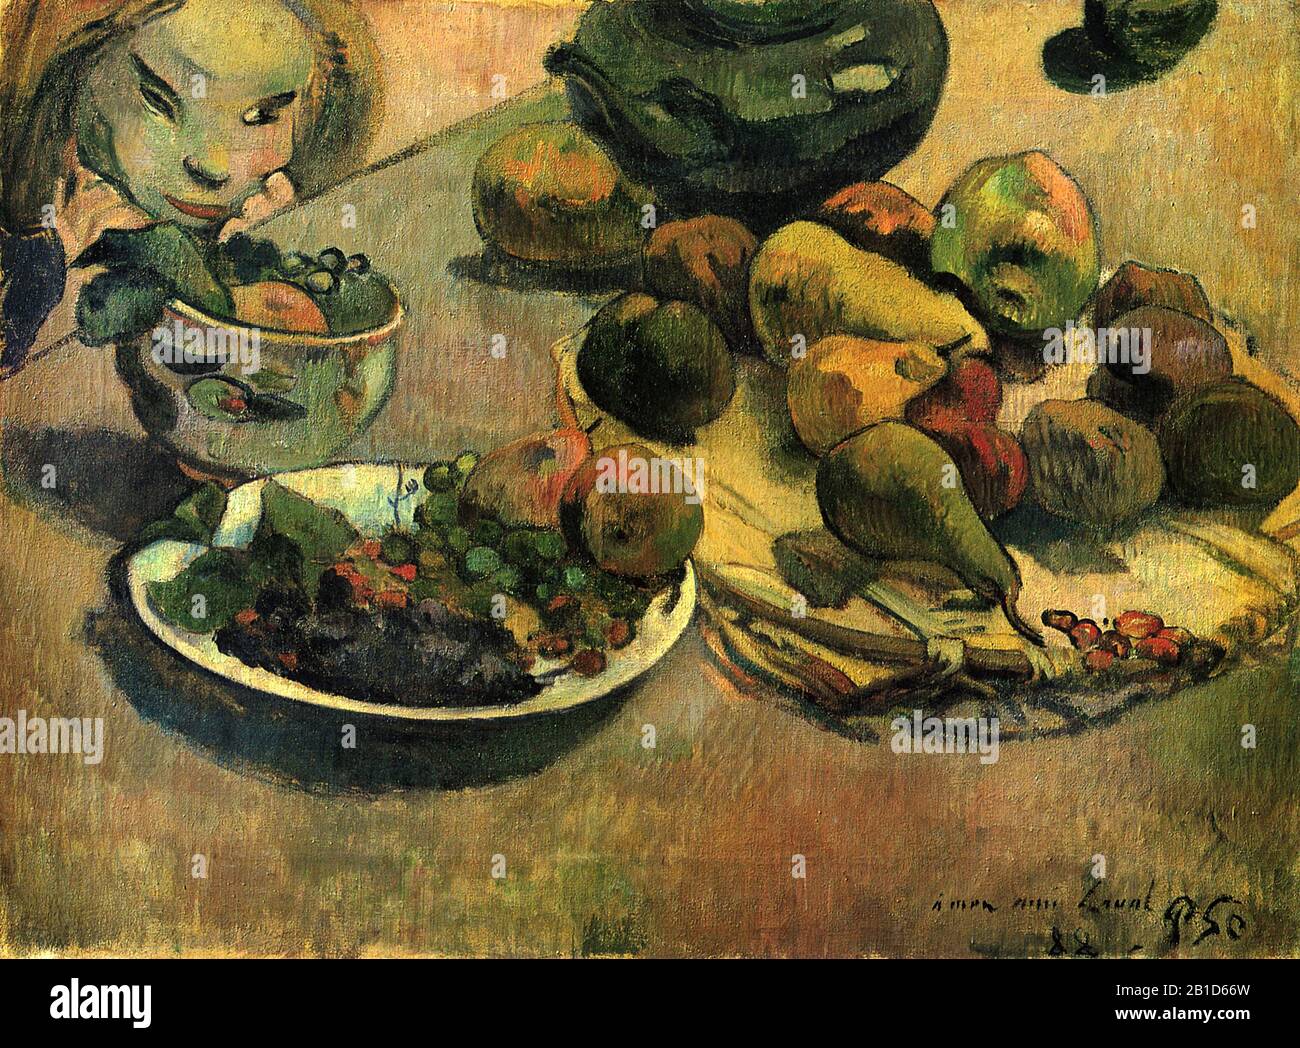 Still Life with Fruit (1888) 19th Century Painting by Paul Gauguin - Very high resolution and quality image Stock Photo